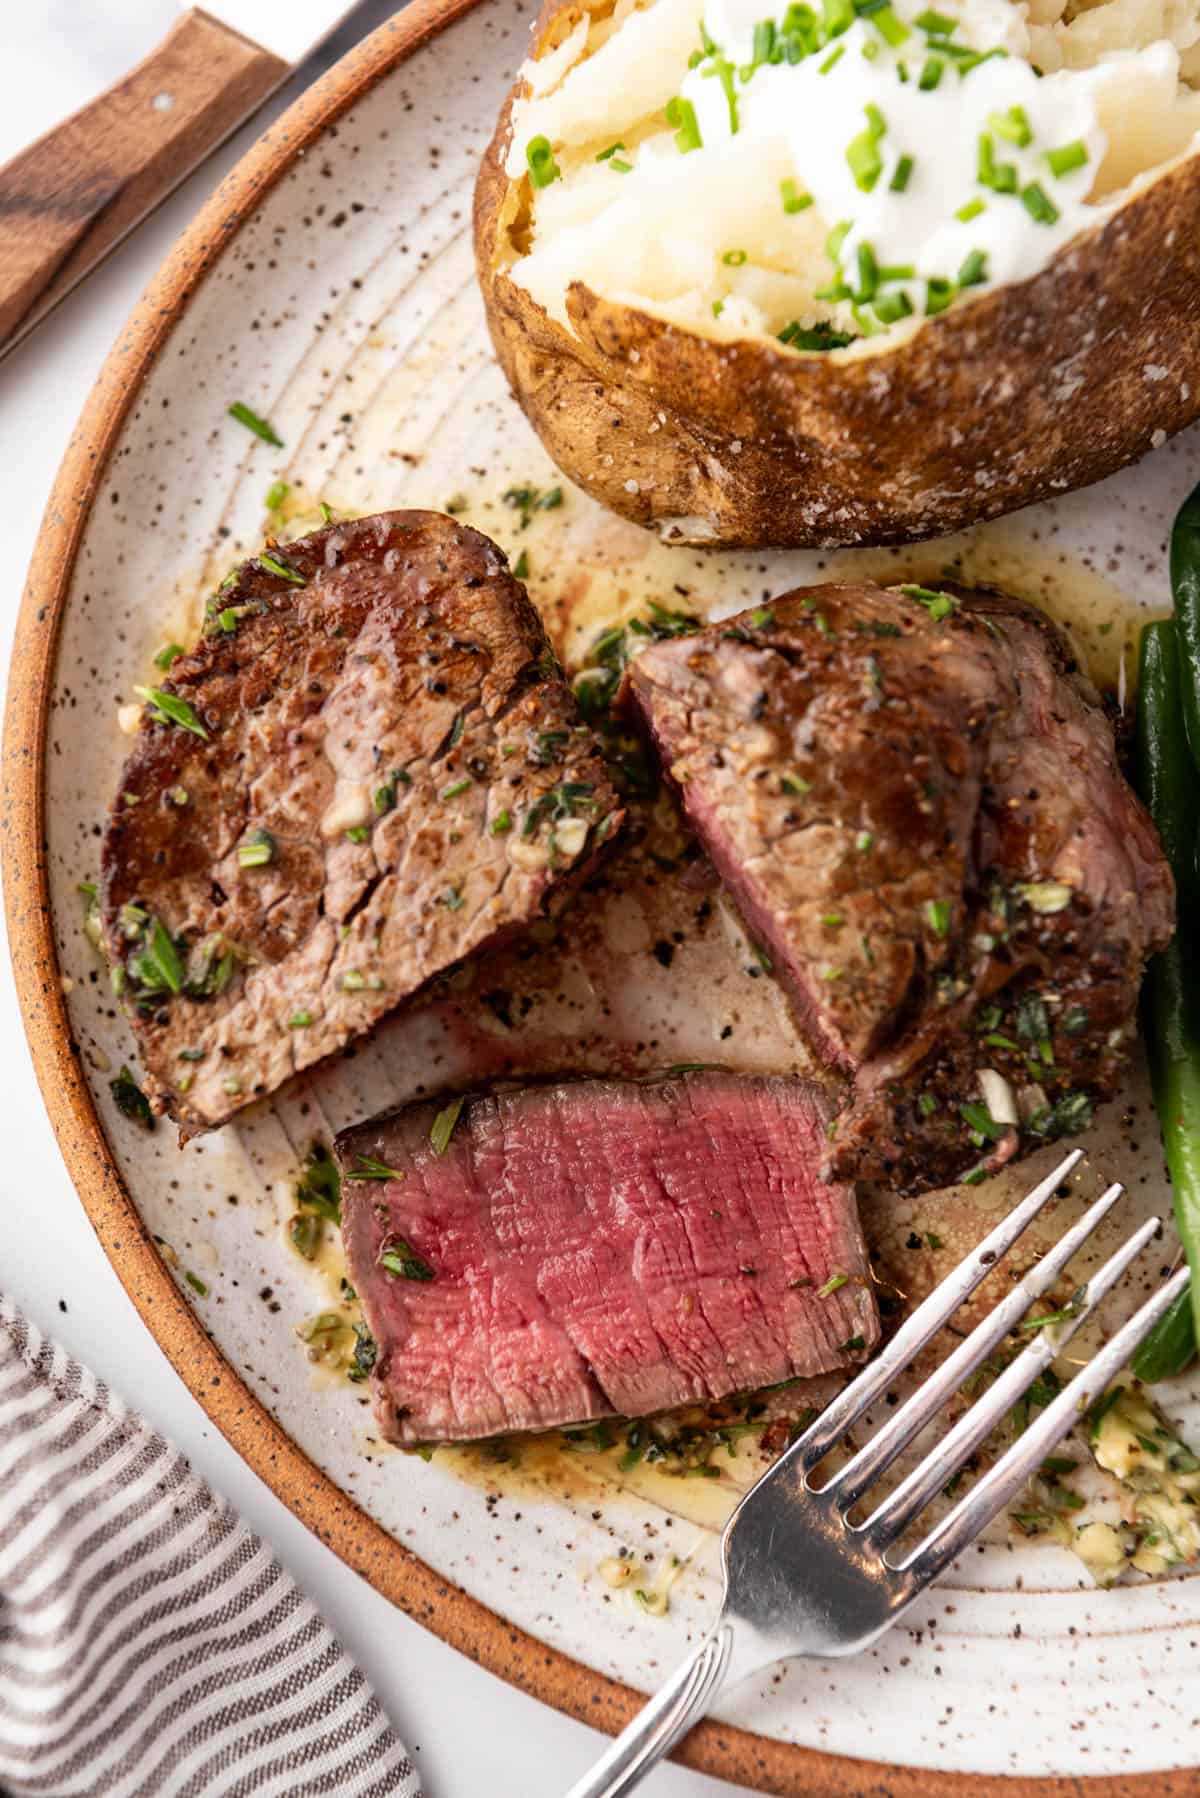 An overhead image of a filet mignon steak that has been cut in half with a slice of the medium-rare meat laying flat on the plate beside a baked potato and fork.